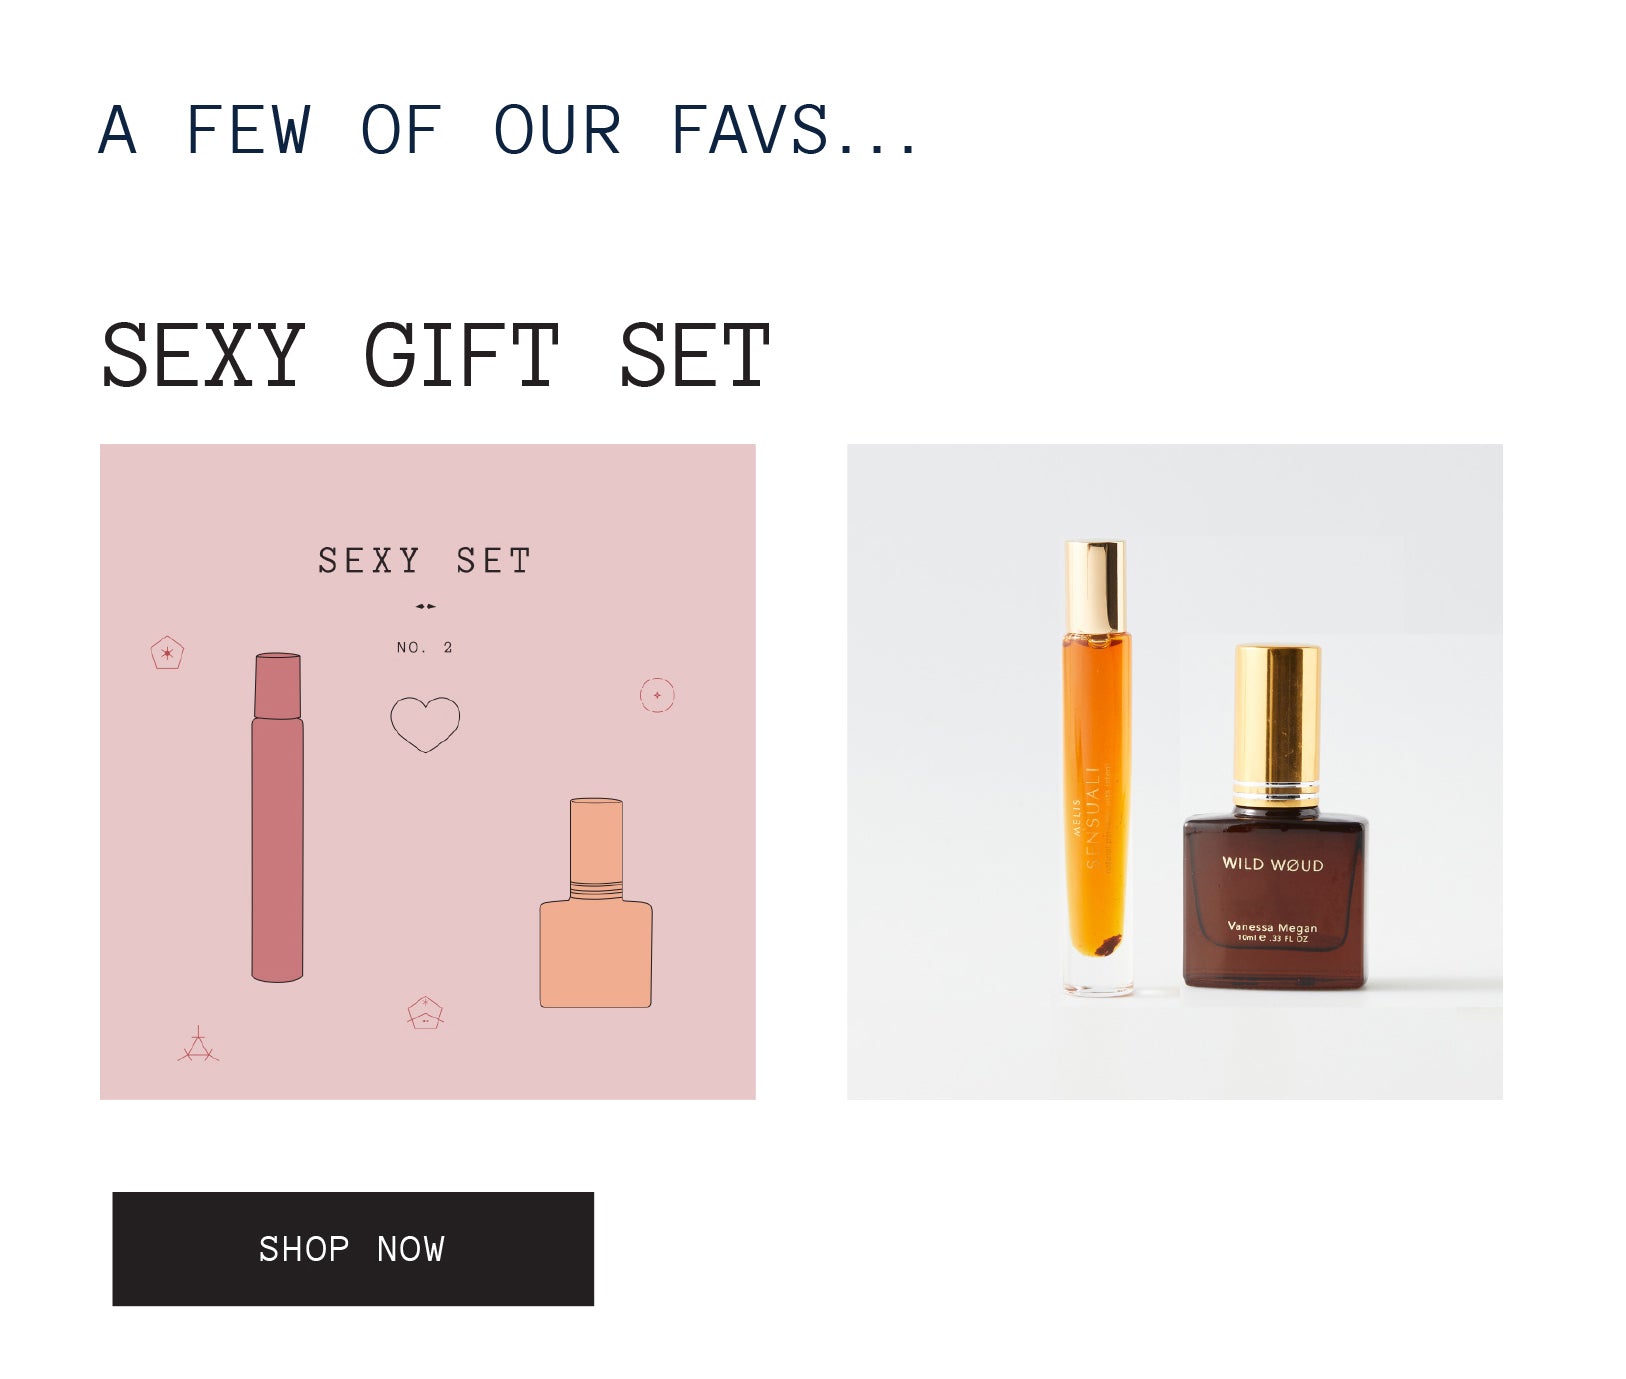 Sexy gift sets for Valentines Day